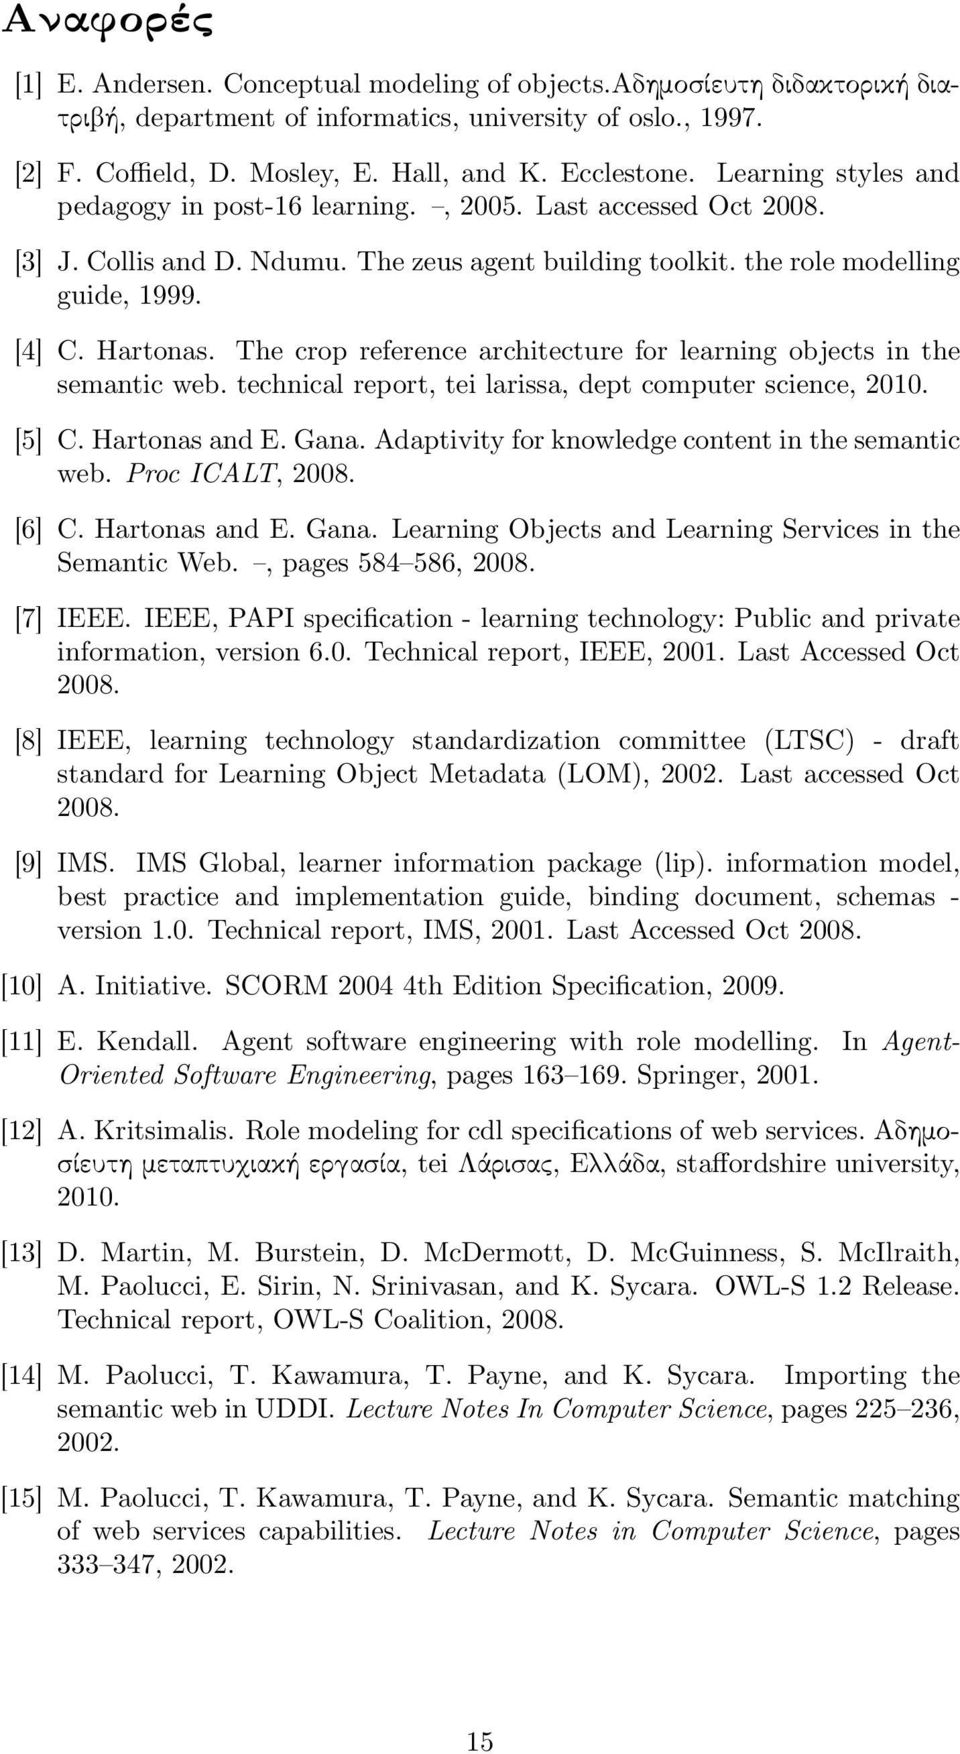 The crop reference architecture for learning objects in the semantic web. technical report, tei larissa, dept computer science, 2010. [5] C. Hartonas and E. Gana.